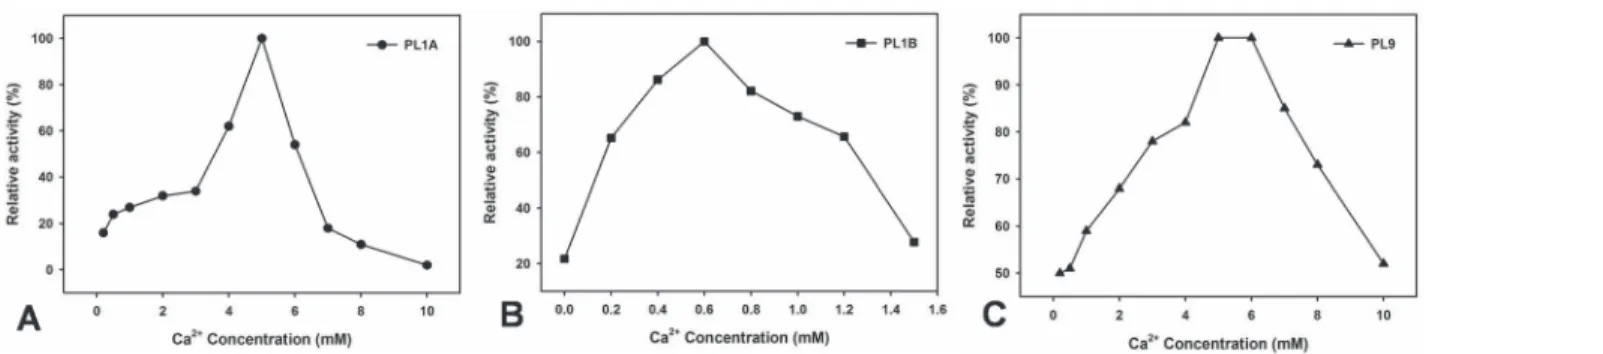 Figure 8. Effect of concentration of Ca 2+ ions on the activity of (A) PL1A; (B) PL1B; (C) PL9 against PGA as substrate.